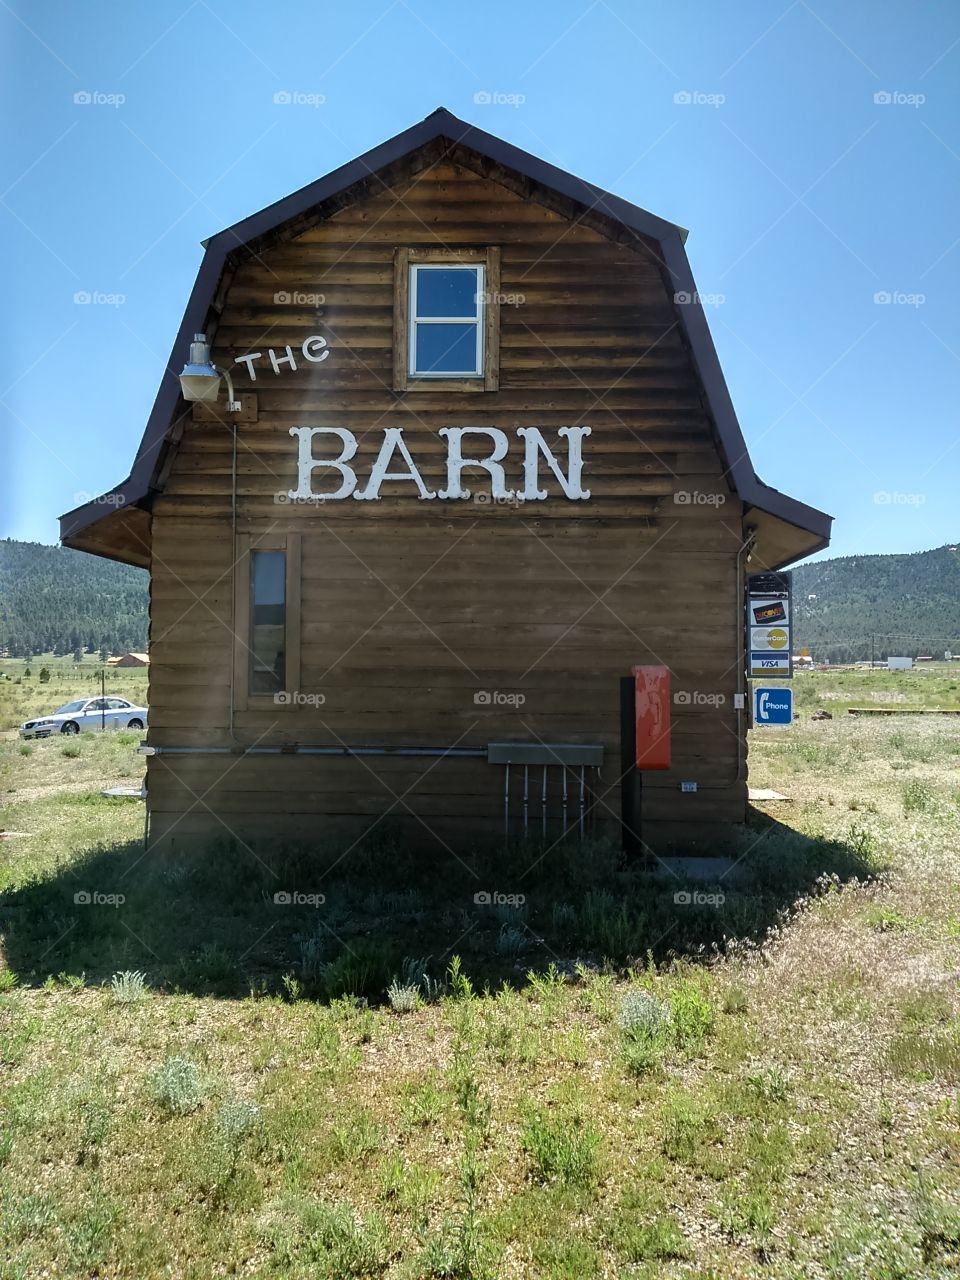 Wood cabin called "The Barn" in Mountain Valley of high Desert southwest USA